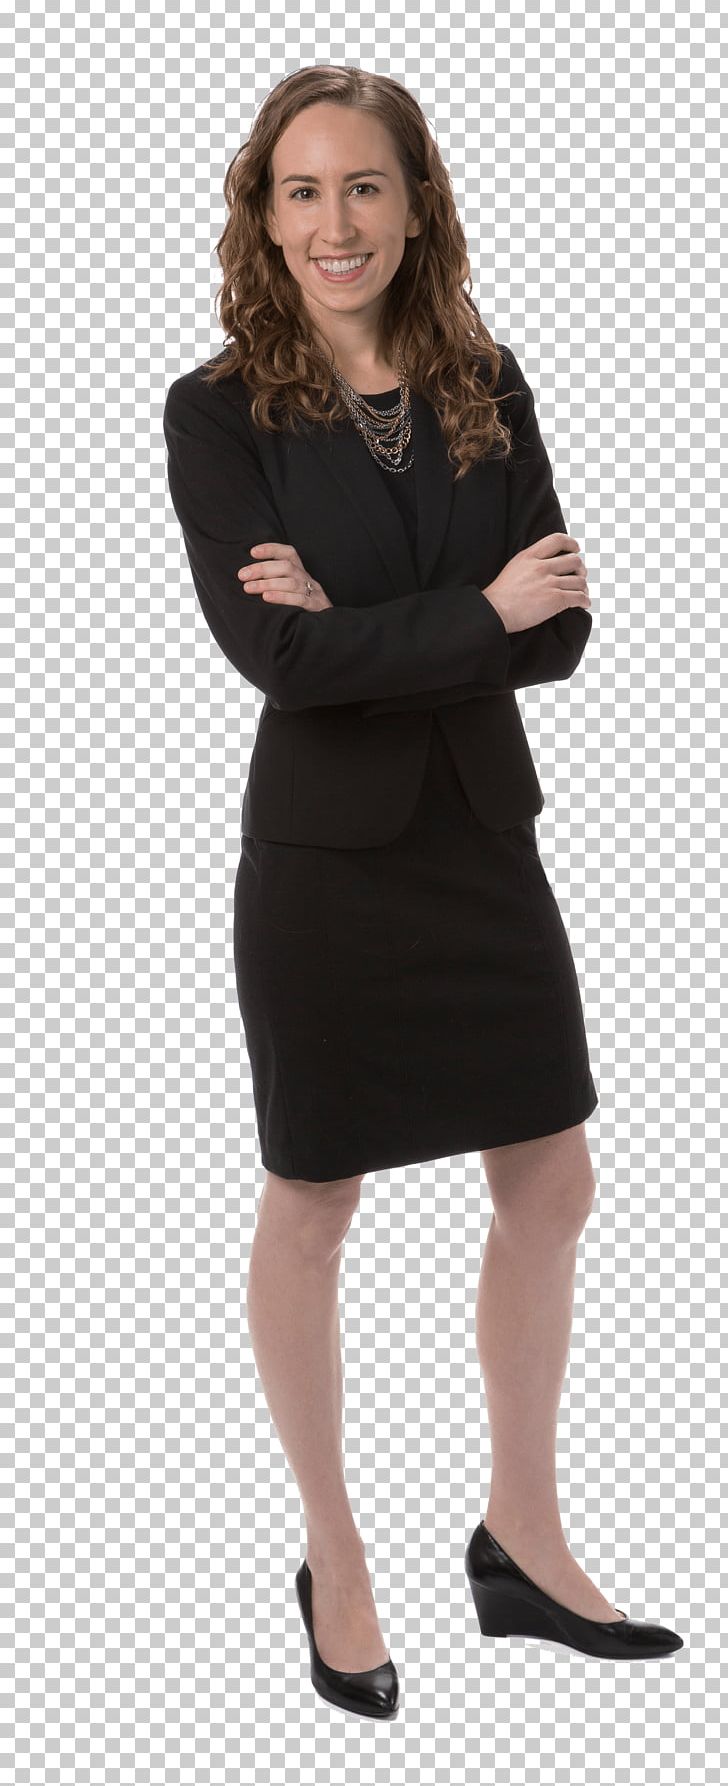 Cocktail Dress Sleeve Formal Wear T-shirt PNG, Clipart, Boat Neck, Businessperson, Chiffon, Clothing, Cocktail Dress Free PNG Download